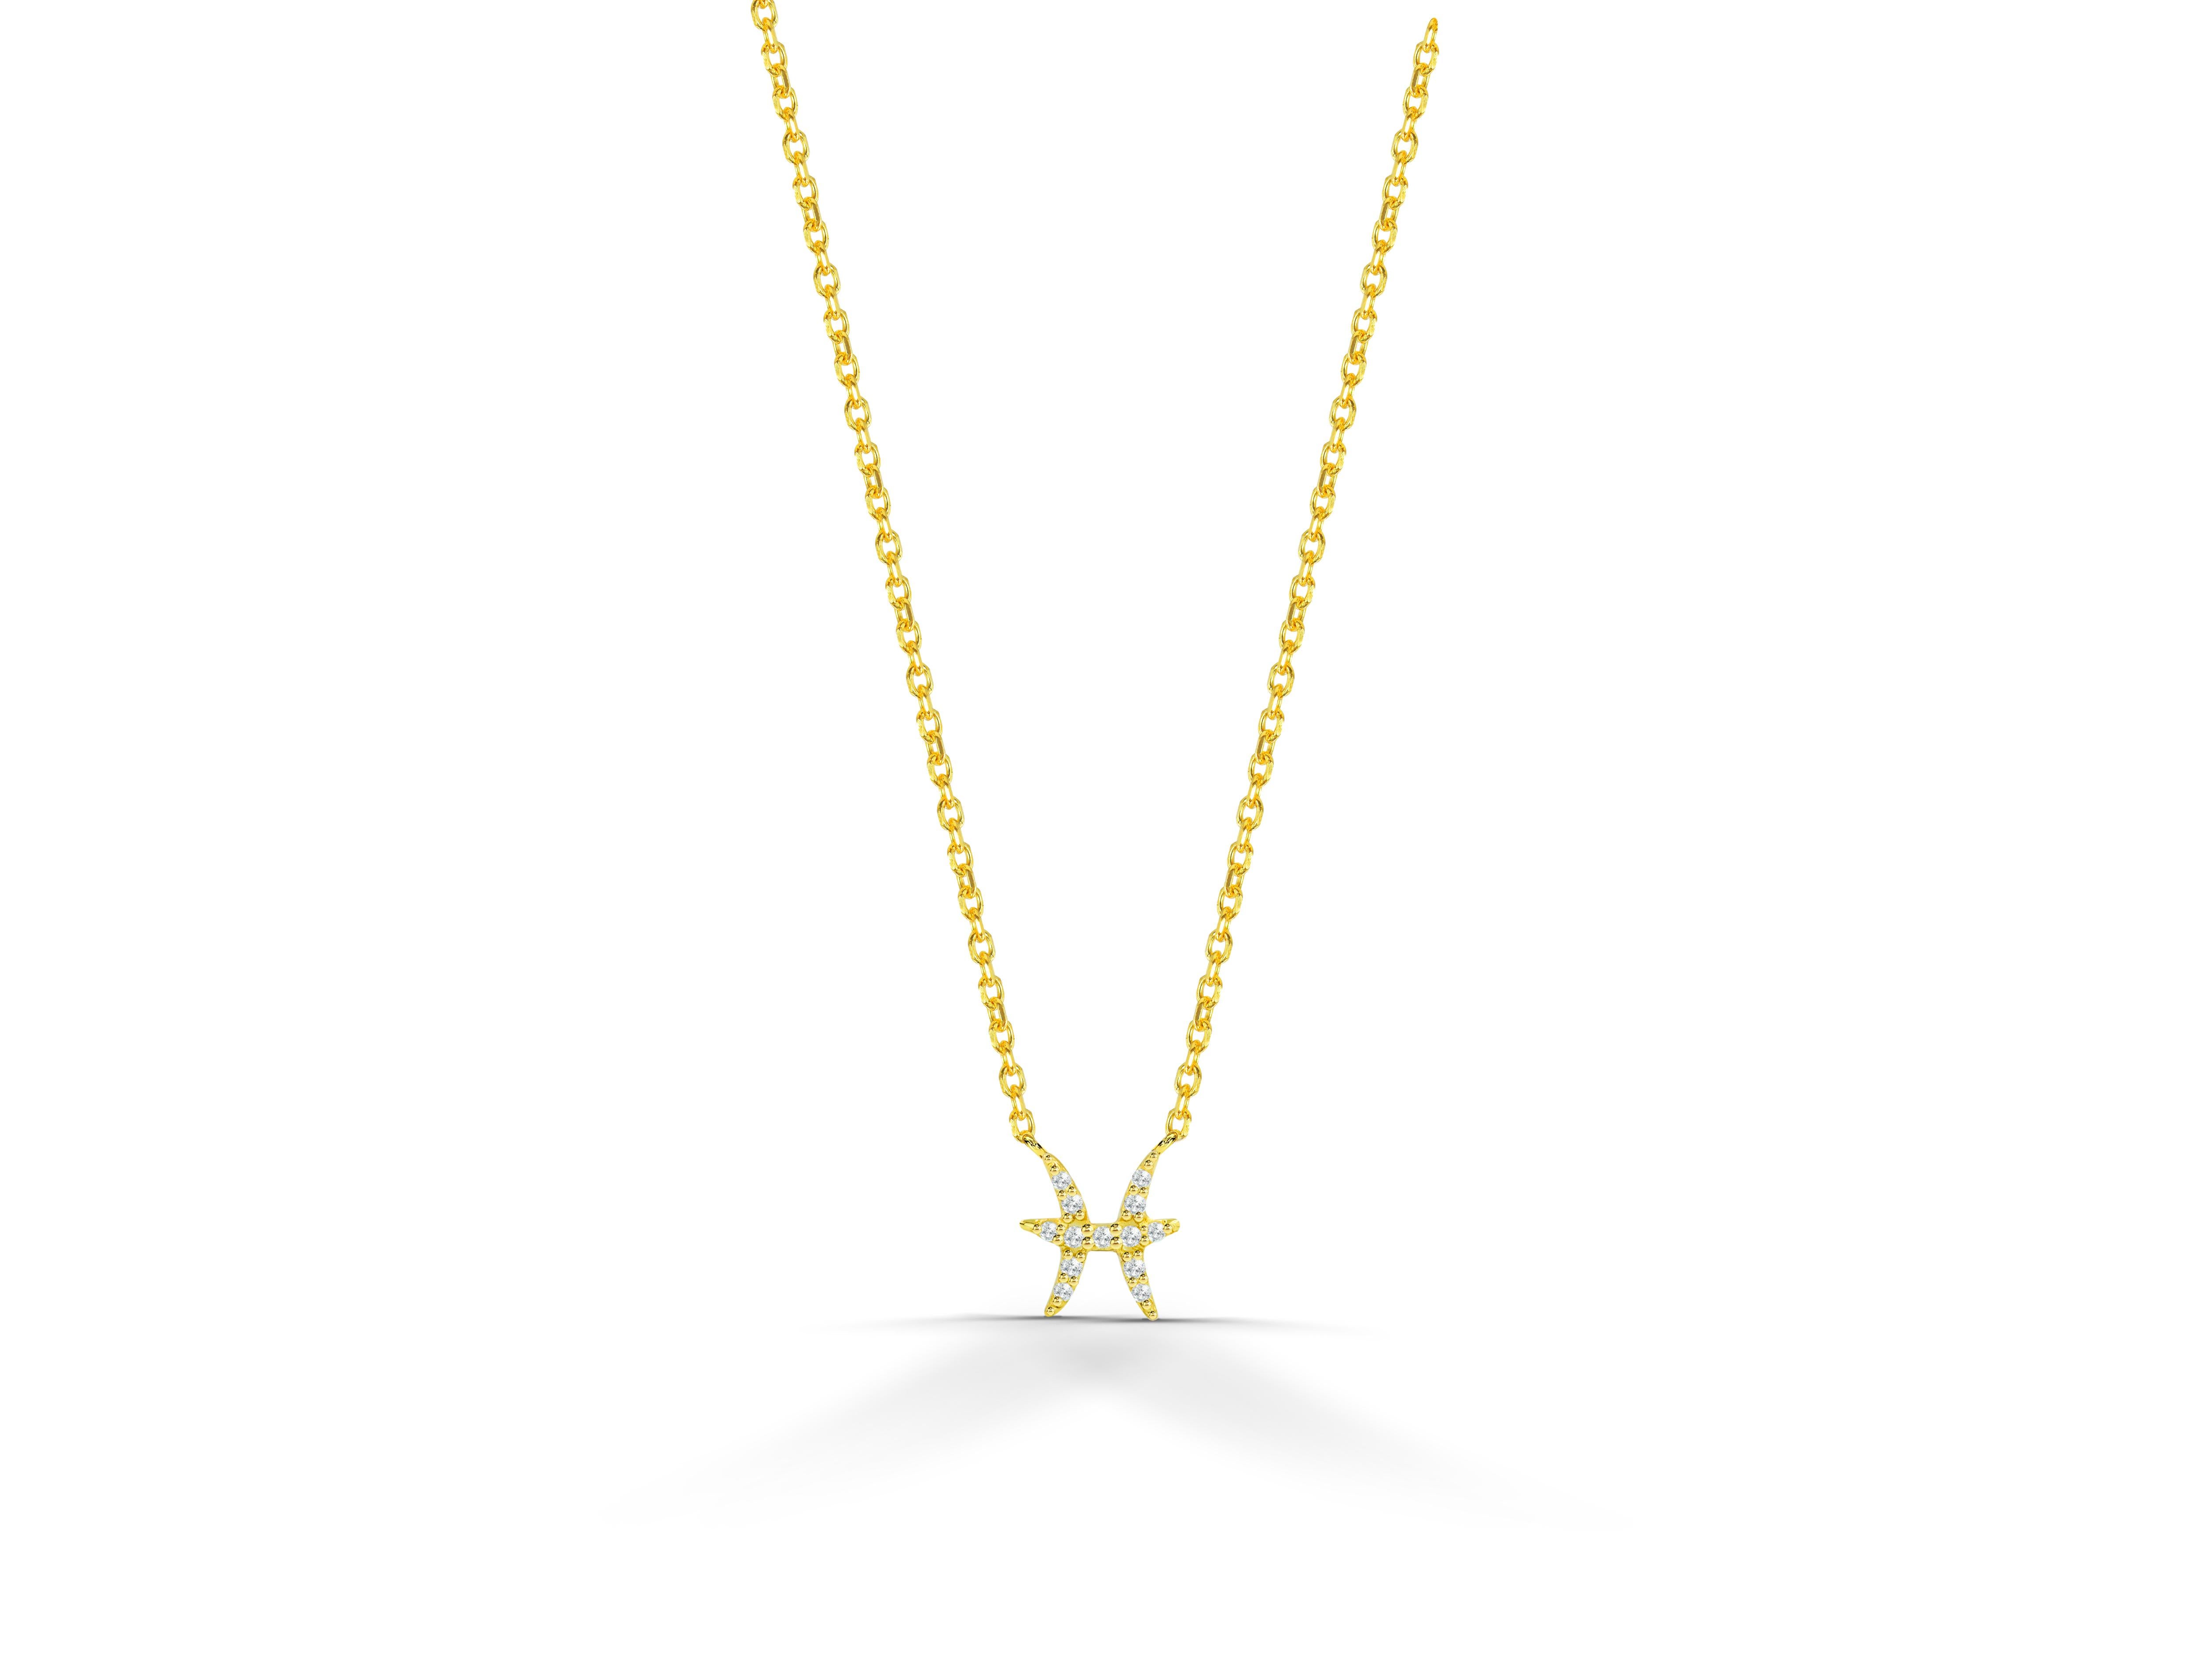 Beautiful and Sparkly Diamond Pisces Necklace is made of 14k solid gold.
Available in three colors of gold: Yellow Gold / White Gold / Rose Gold.

Natural genuine round cut diamond each diamond is hand selected by me to ensure quality and set by a